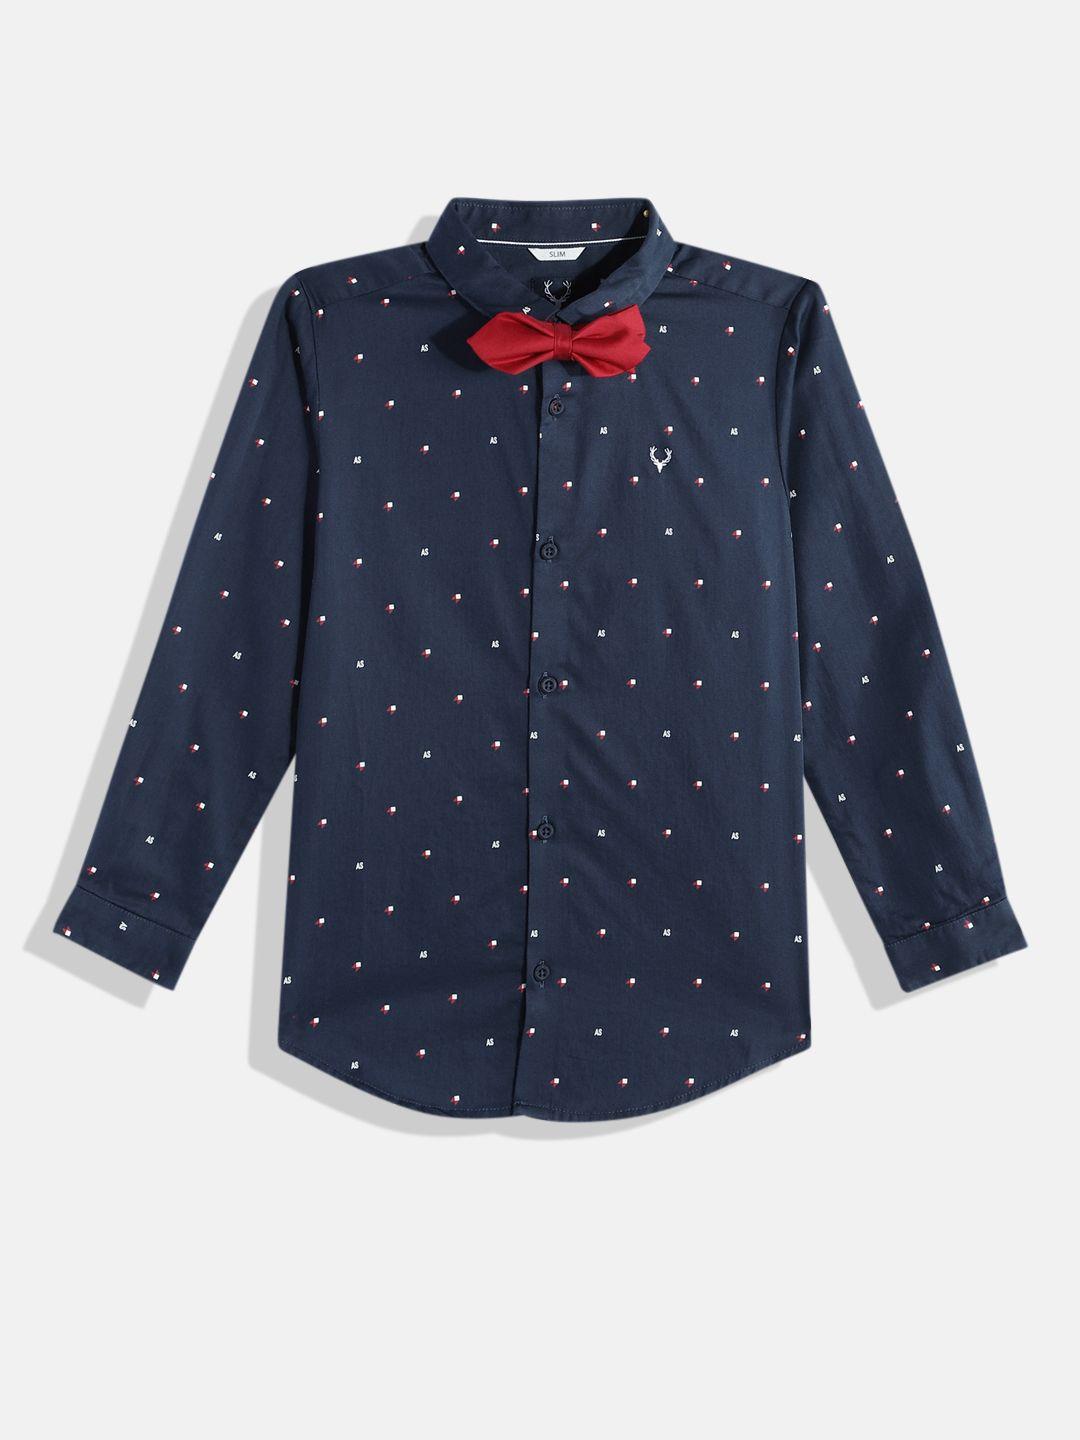 allen solly junior boys brand logo printed pure cotton casual shirt with a bow